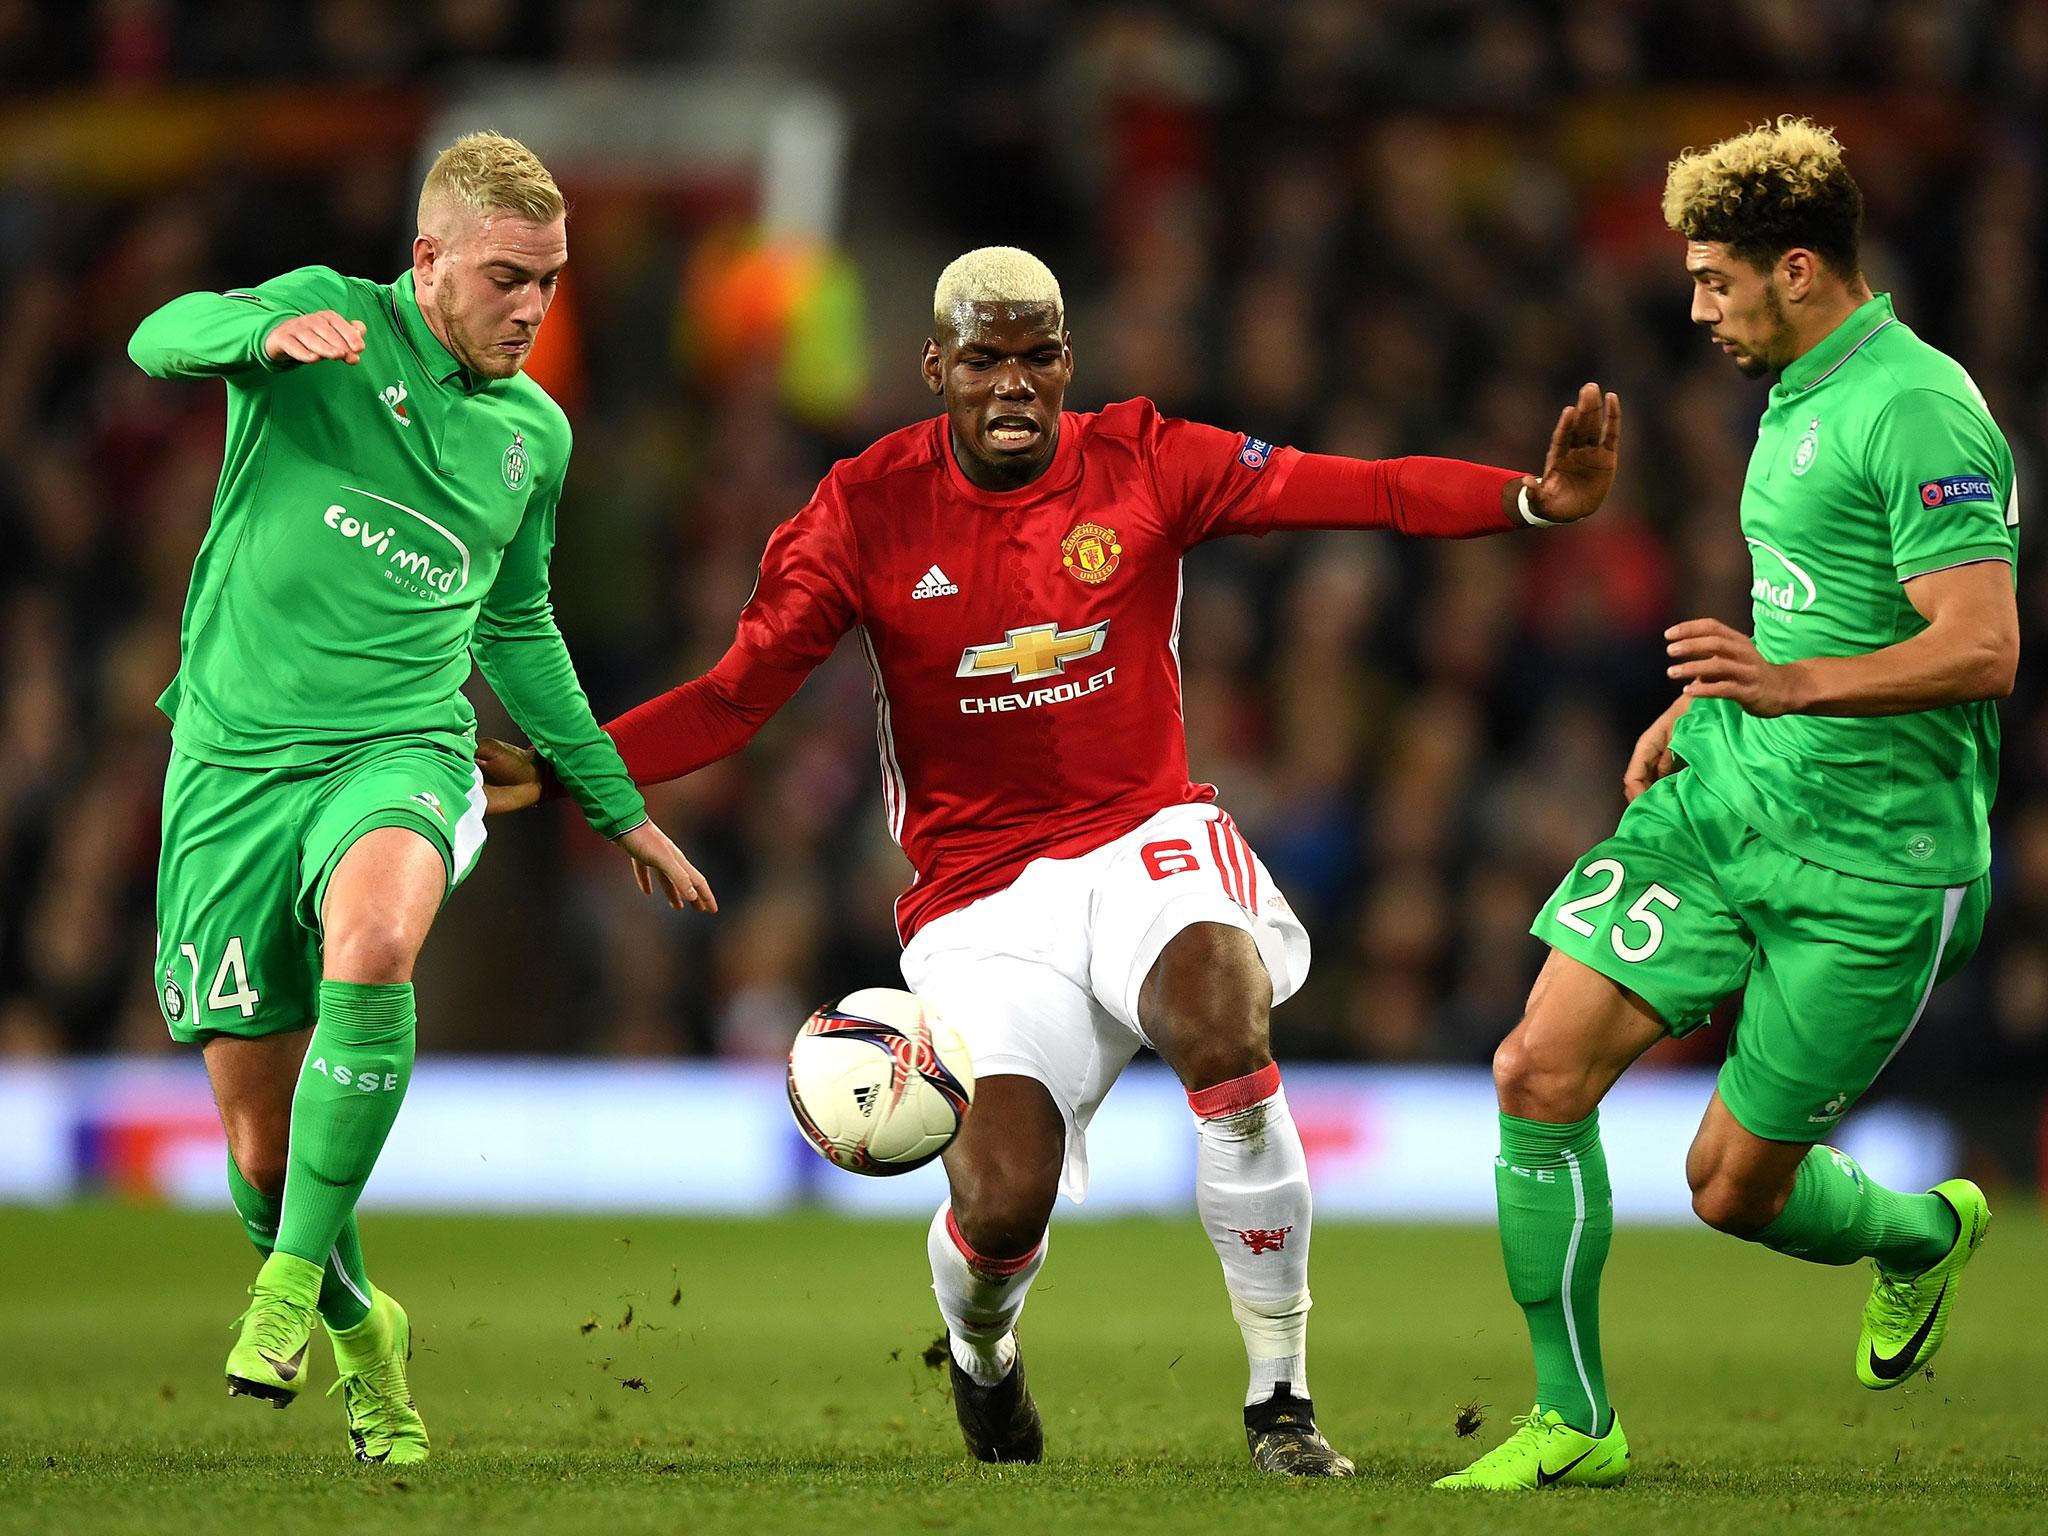 Paul Pogba won the battle of the brothers on this occasion (Getty)